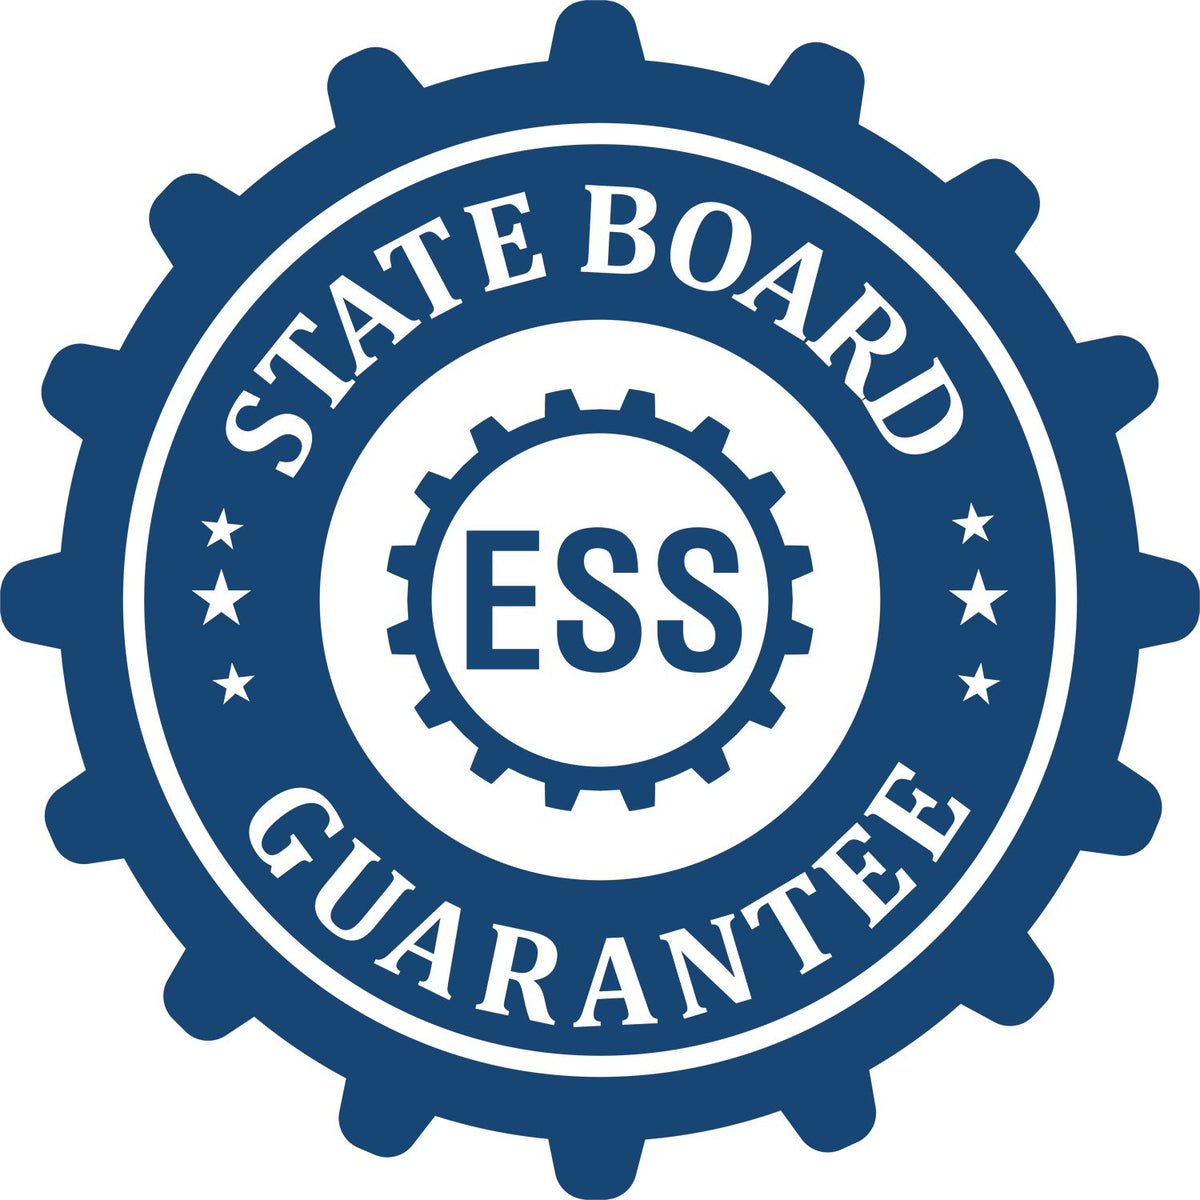 An emblem in a gear shape illustrating a state board guarantee for the Heavy-Duty Arizona Rectangular Notary Stamp product.